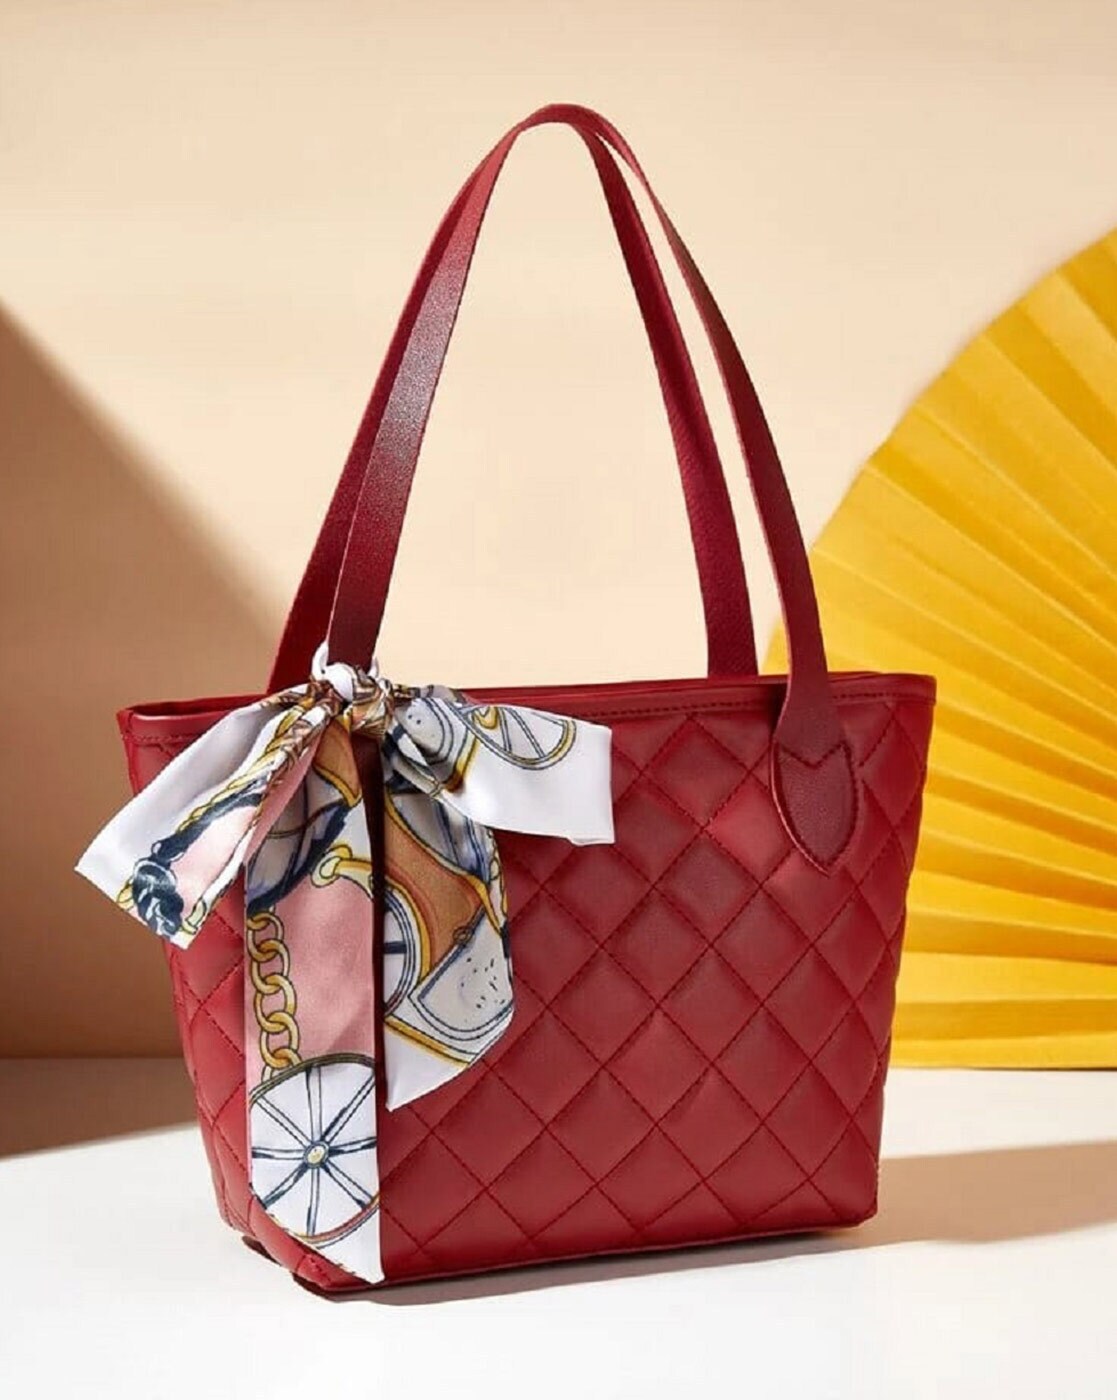 Carey Tote | Kate Spade Outlet